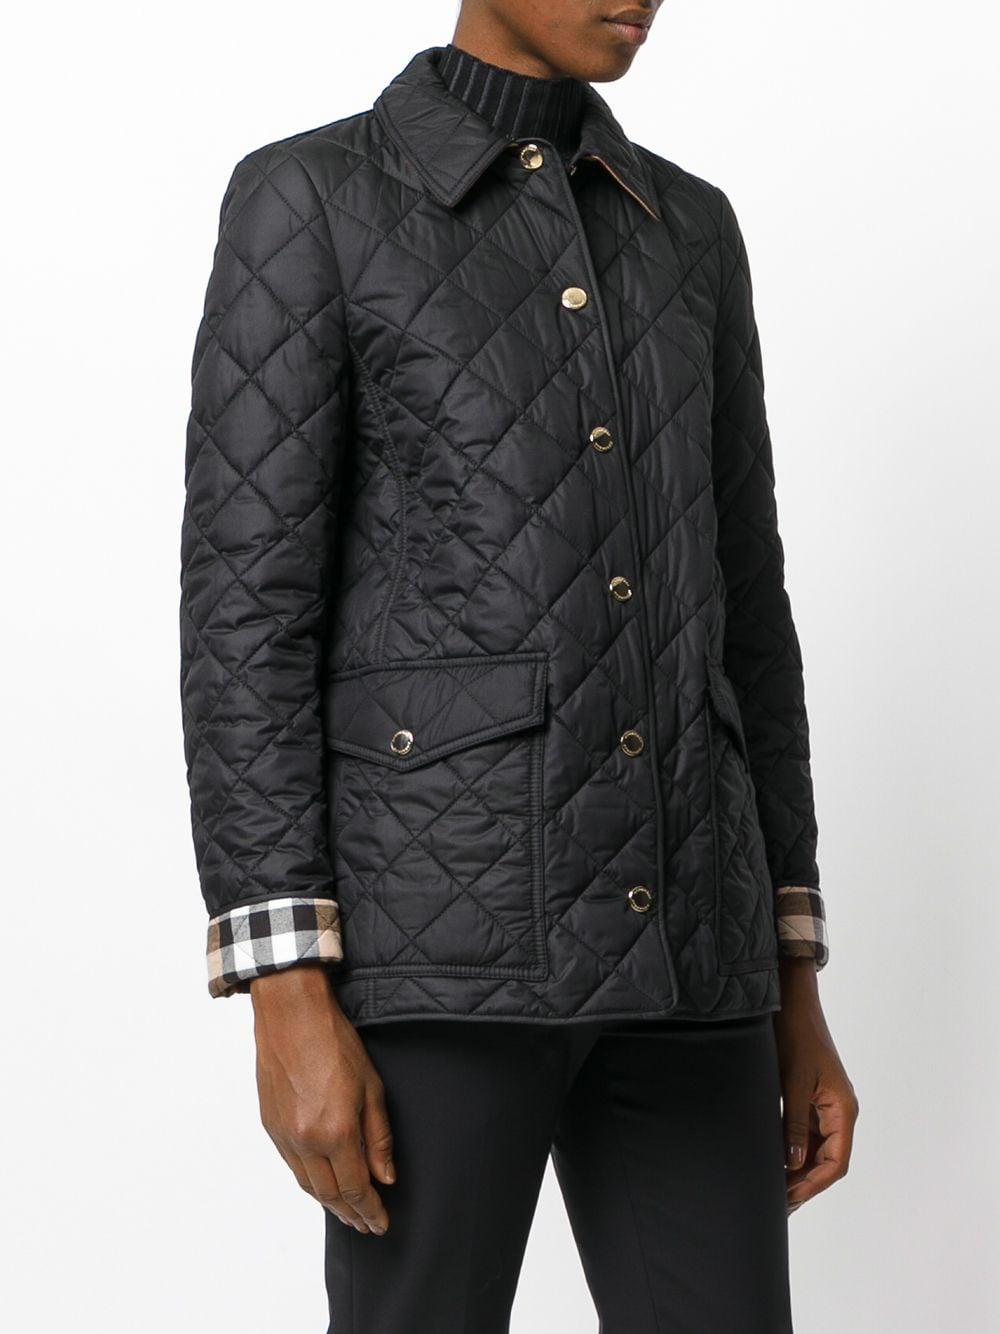 Diamond Quilted Jacket 